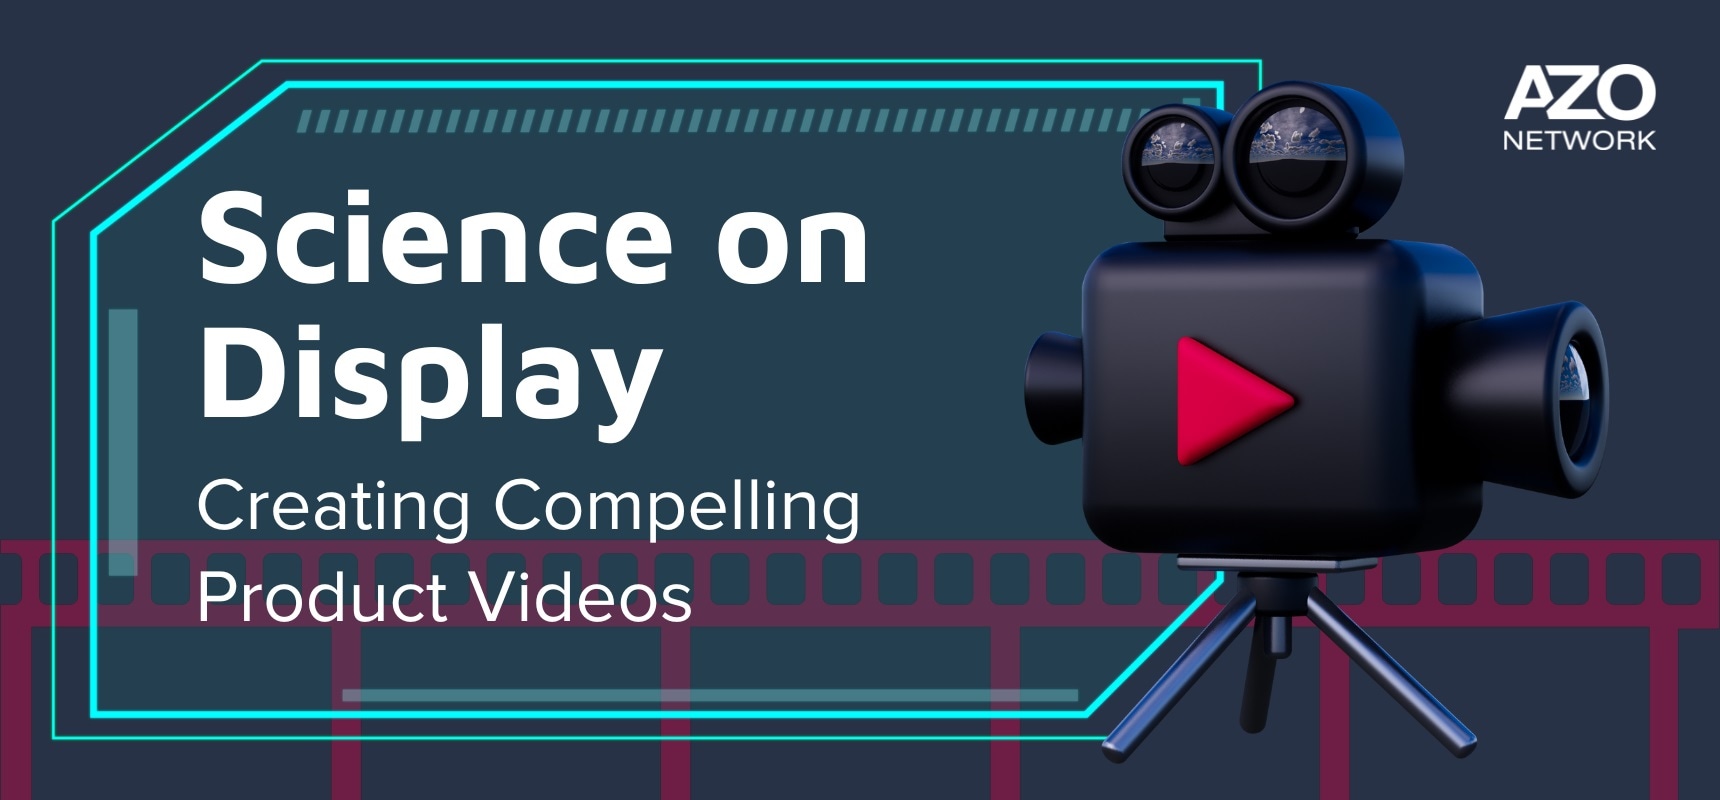 science on display: creating compelling product videos banner image illustration